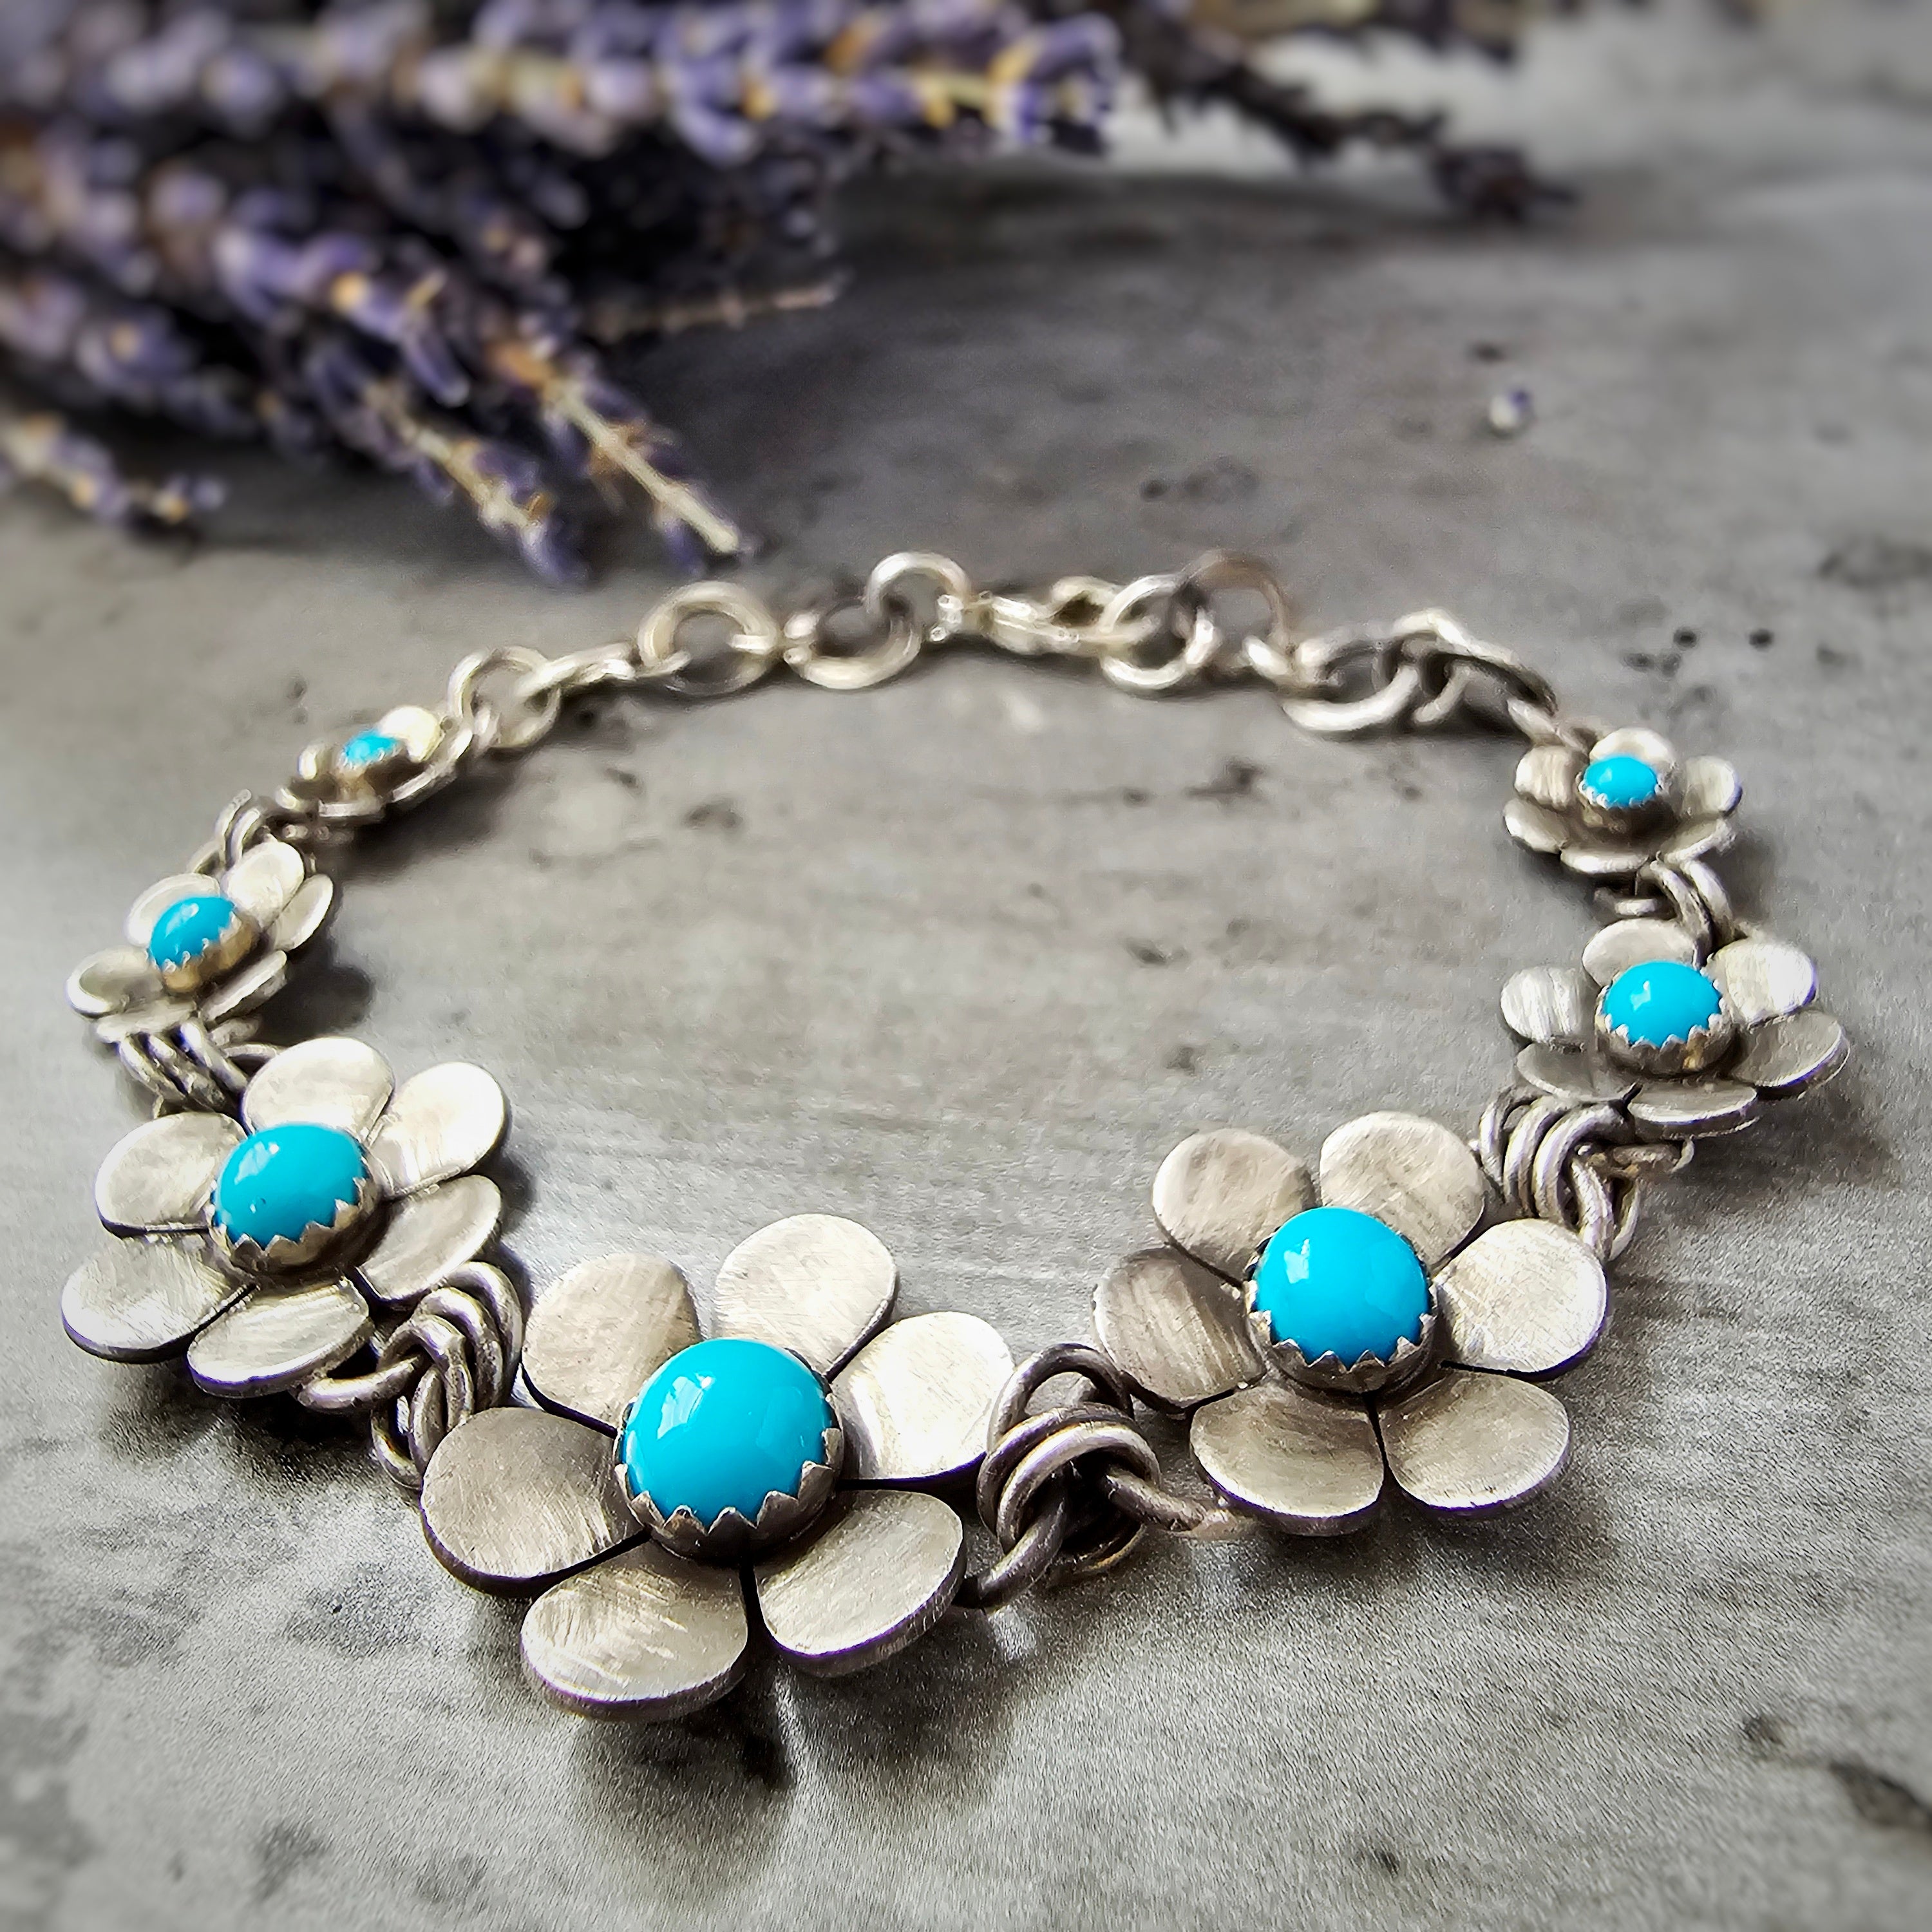 Floral Bracelet with Turquoise